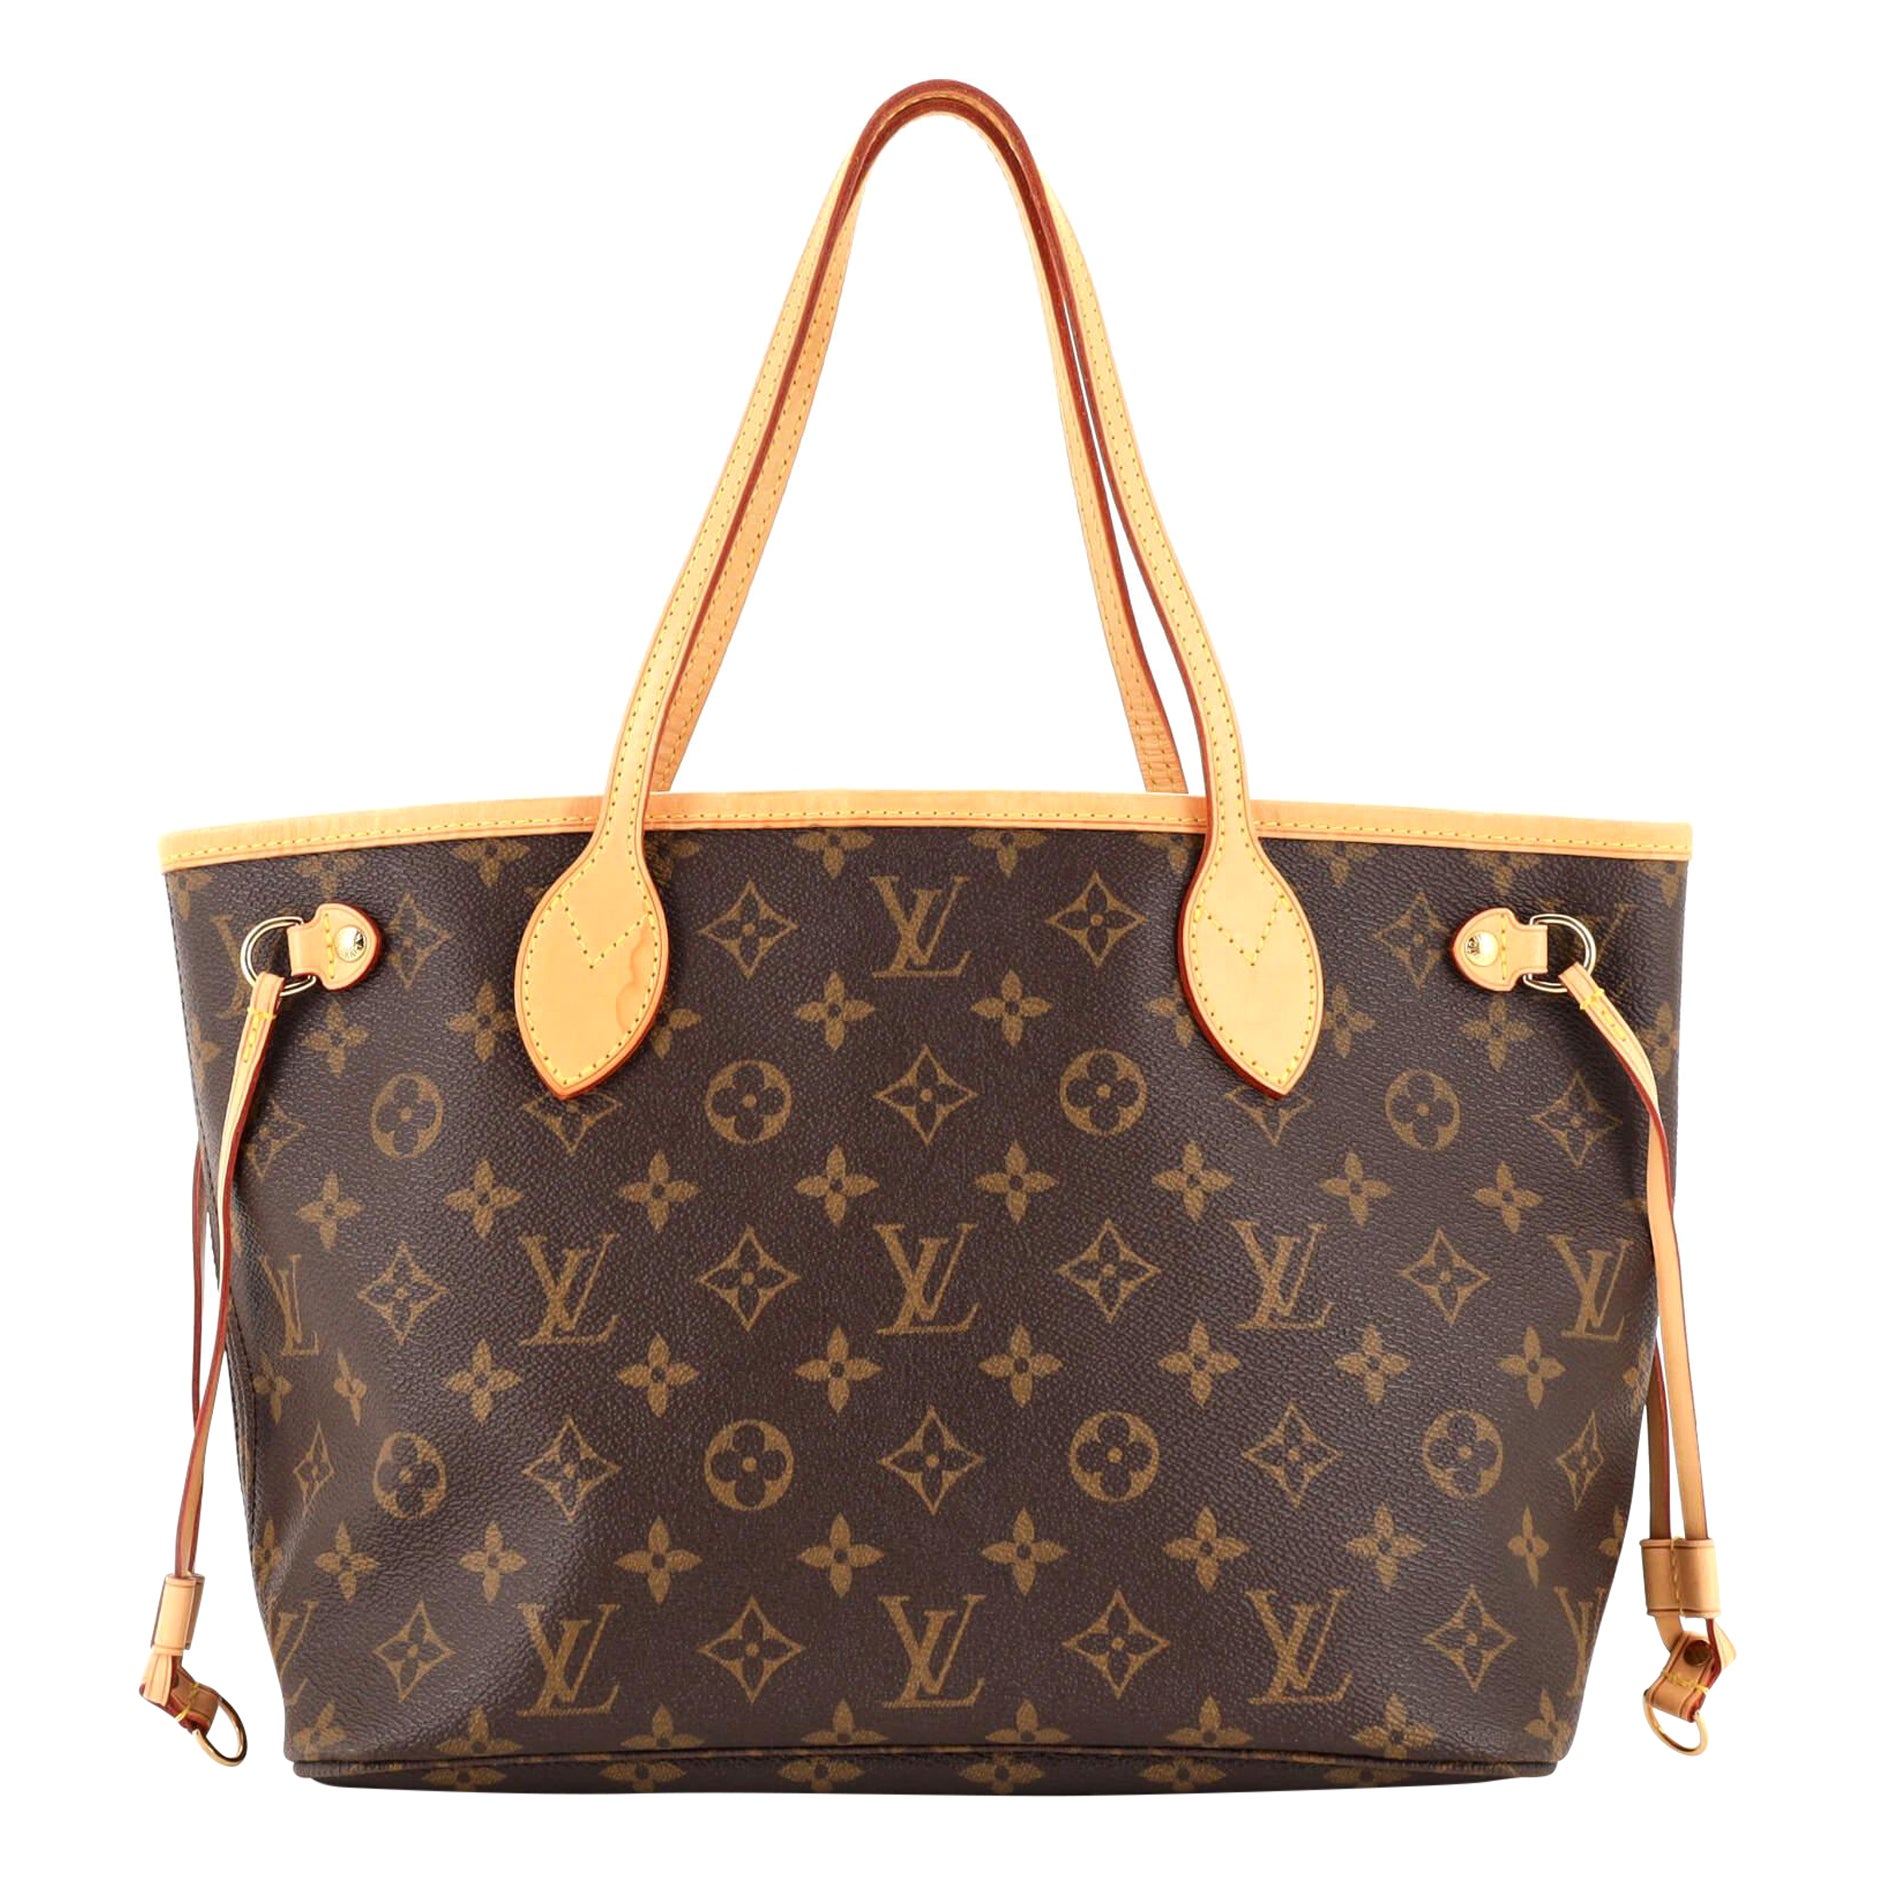 Louis Vuitton Neverfull Pm - 29 For Sale on 1stDibs  neverfull pm price, louis  vuitton neverfull pm monogram, louis vuitton neverfull pm damier